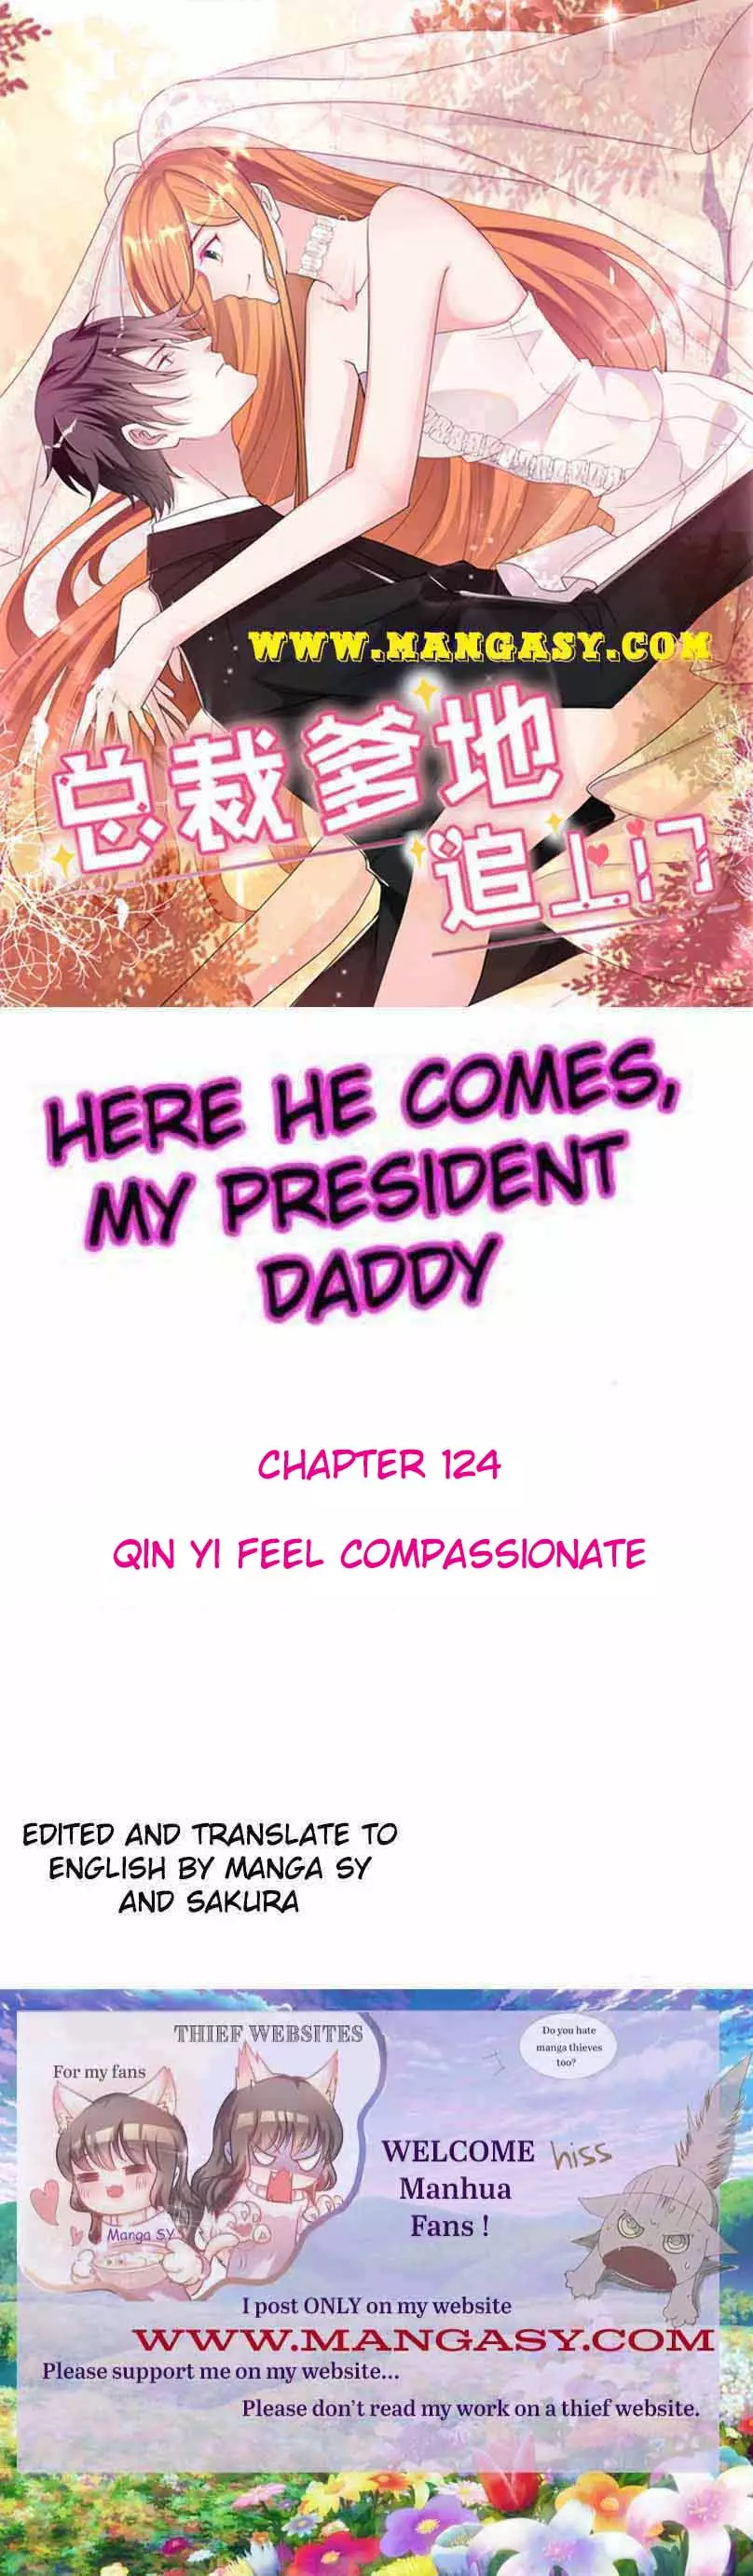 President Daddy Is Chasing You - 124 page 1-c094b956